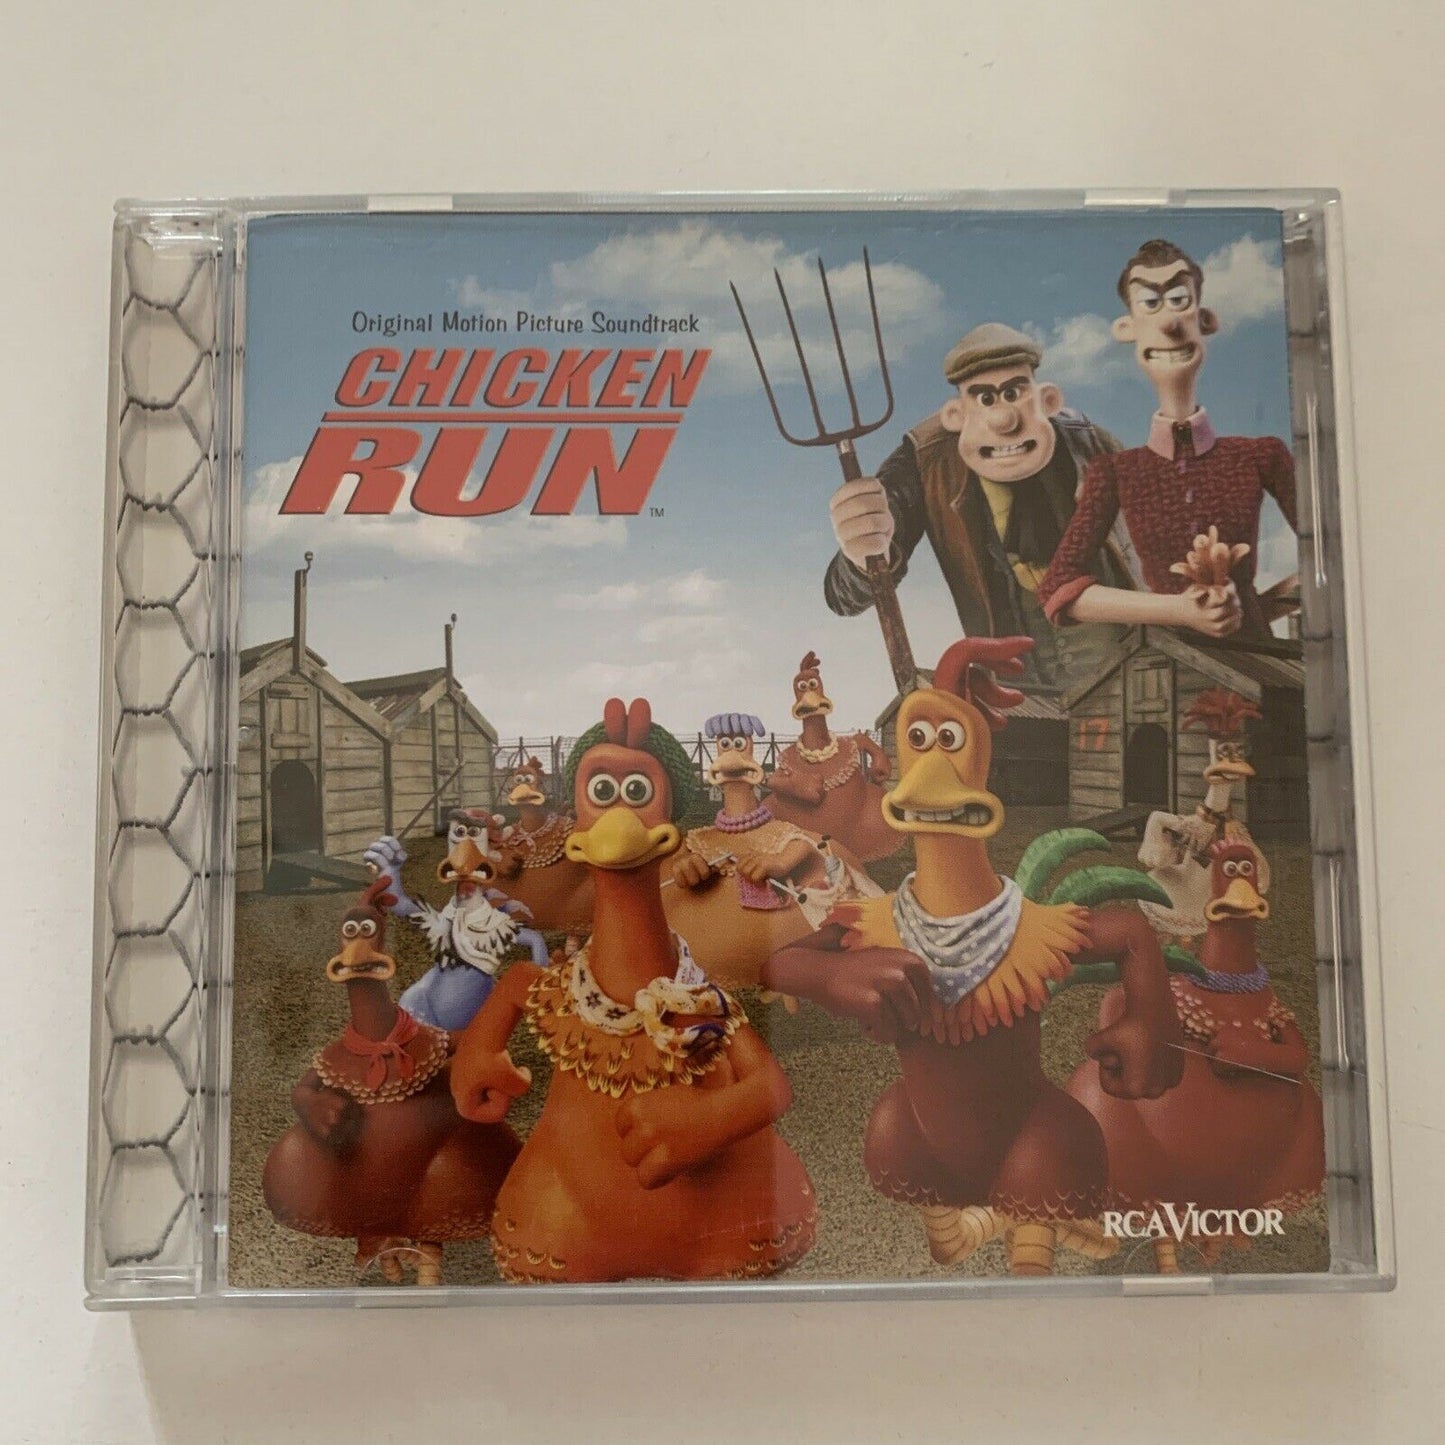 Chicken Run [Original Motion Picture Soundtrack] by John Powell (CD, 2000)